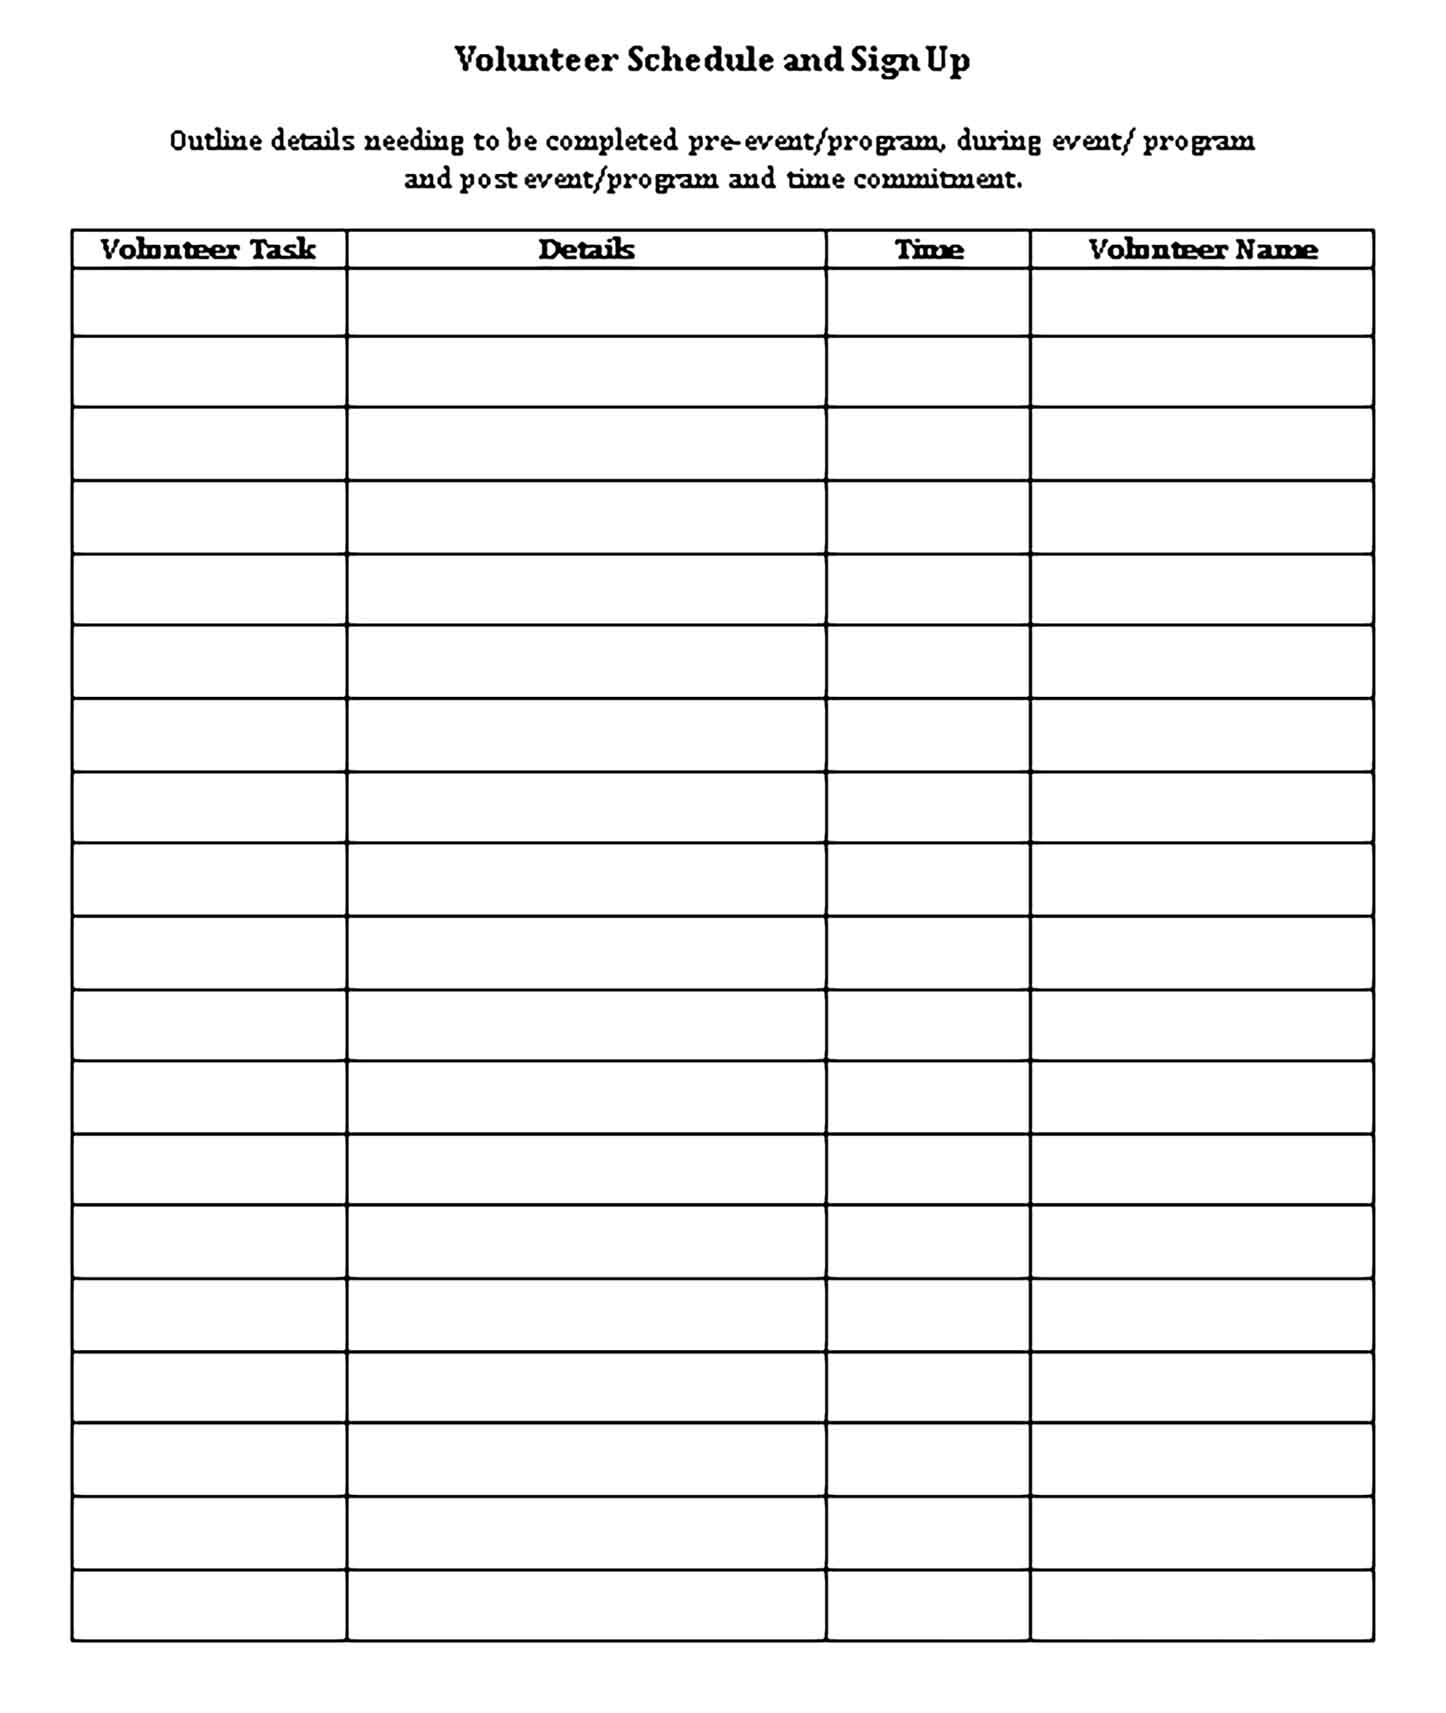 Template Volunteer Schedule and Sign Up in Word Doc Sample